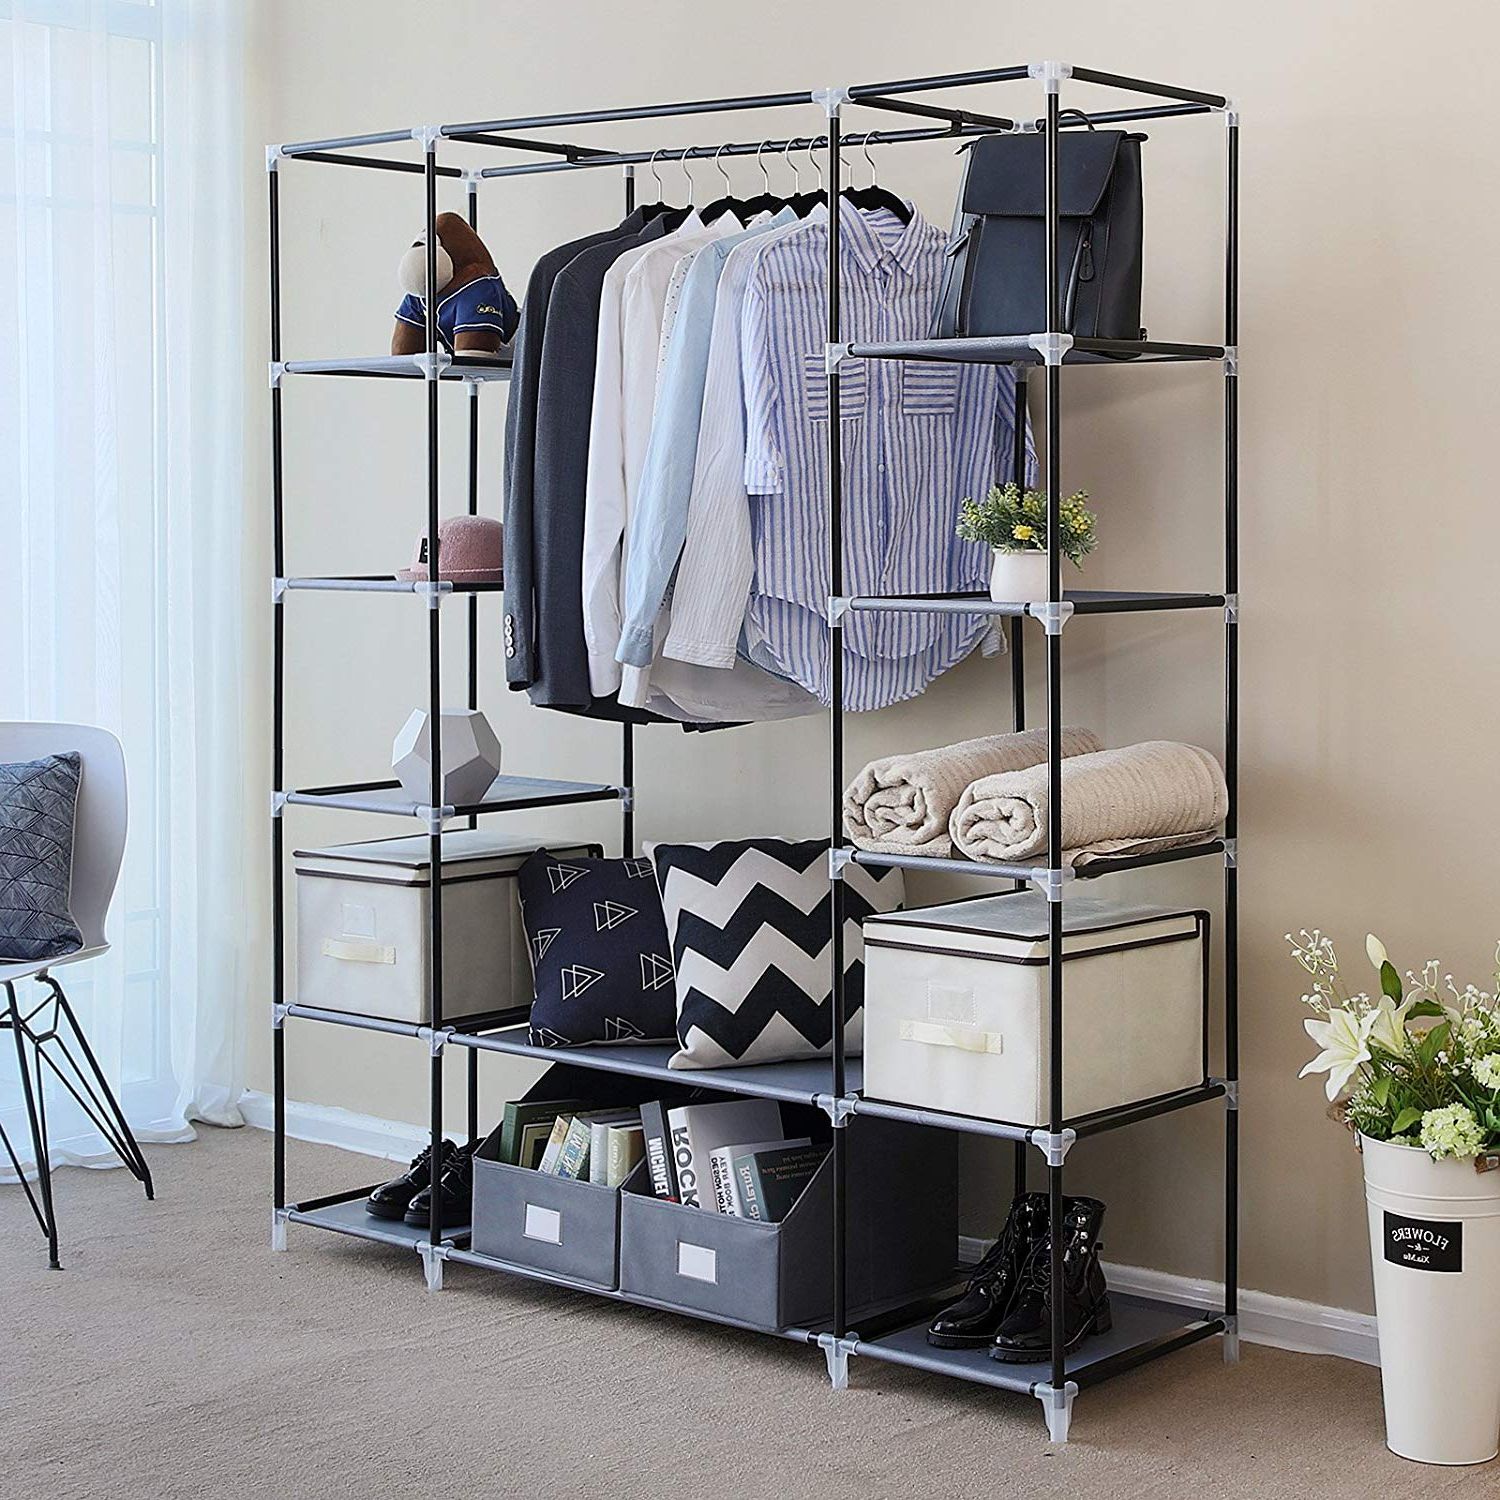 Wardrobes With Shelf Portable Closet Within 2018 20 Portable Closet Choices For Easy Set Up And Cleaning (Photo 10 of 10)